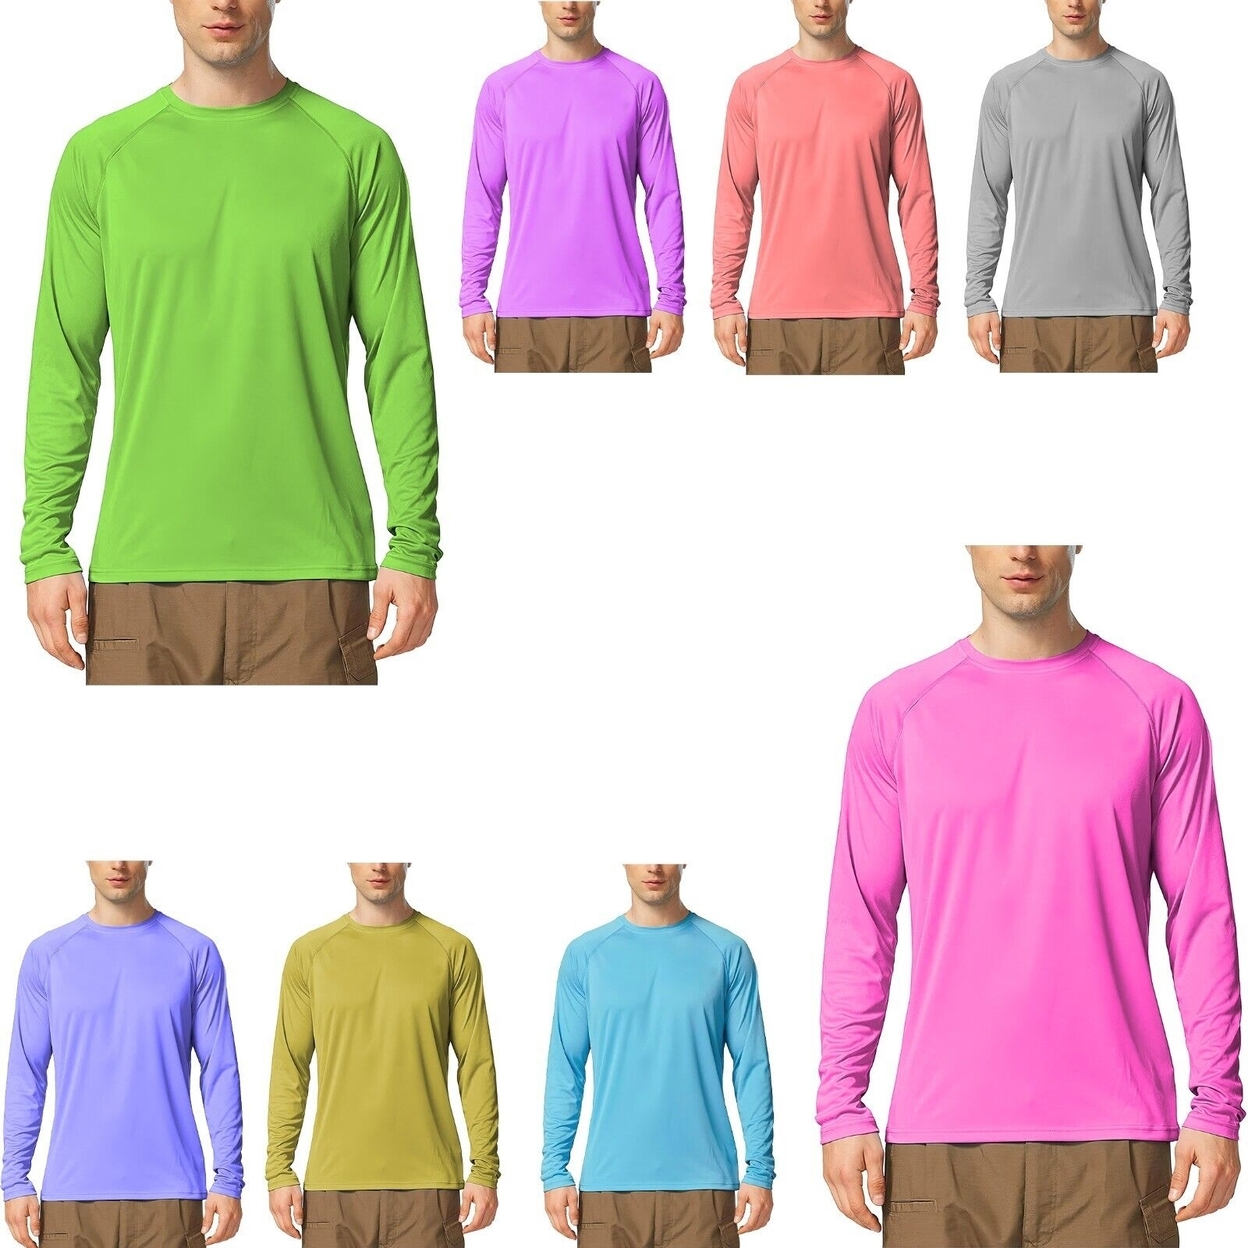 6-Pack: Men's Dri-Fit Moisture Wicking Athletic Cool Performance Slim Fit Long Sleeve T-Shirts - Large